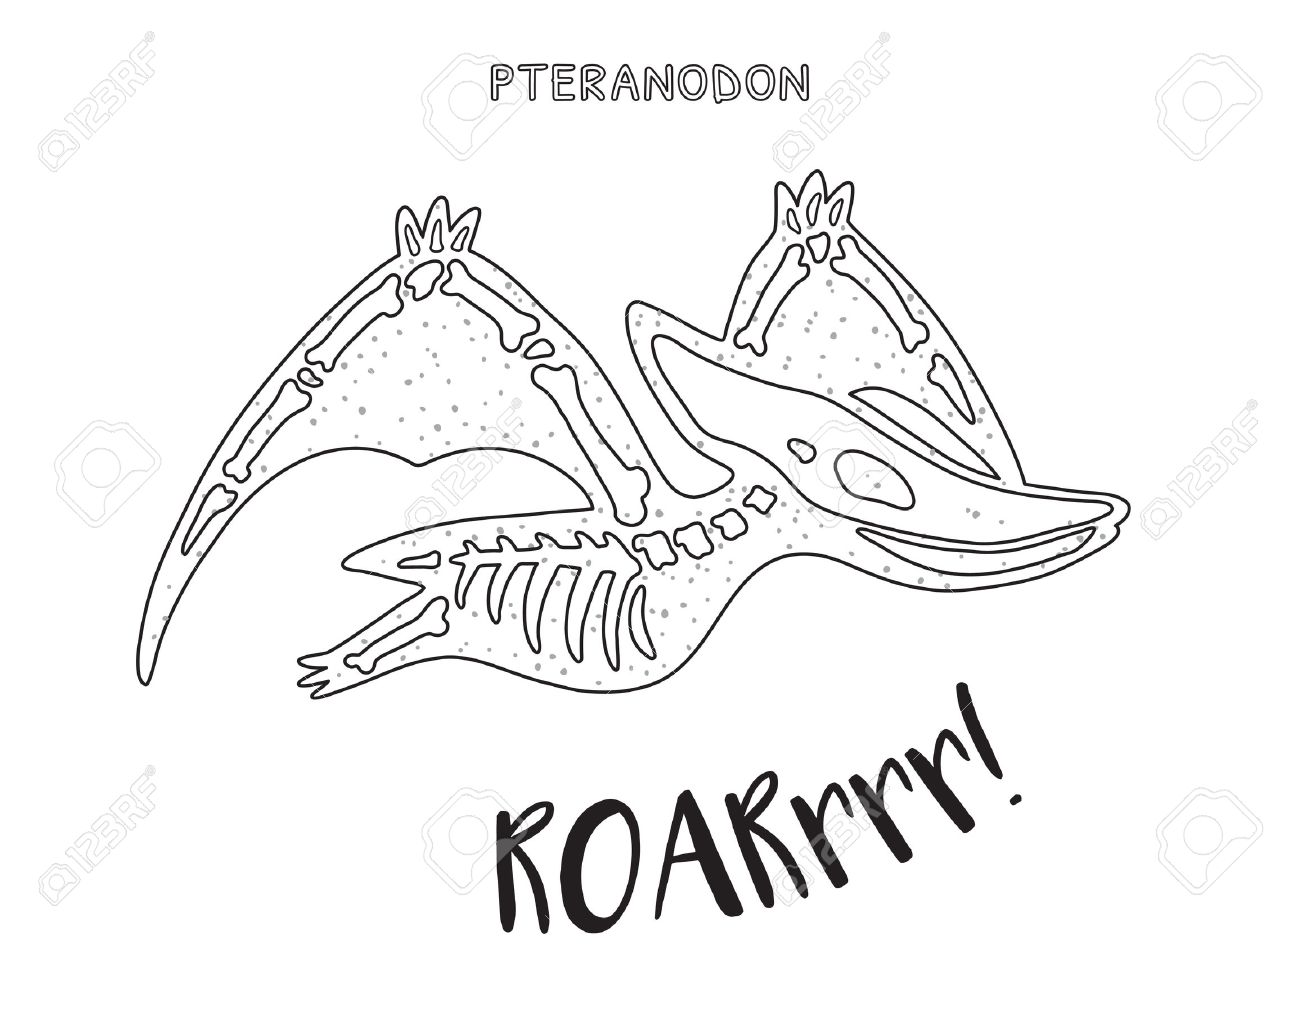 Pteranodon skeleton outline drawing fossil of a pteranodon dinosaur skeleton coloring book page royalty free svg cliparts vectors and stock illustration image